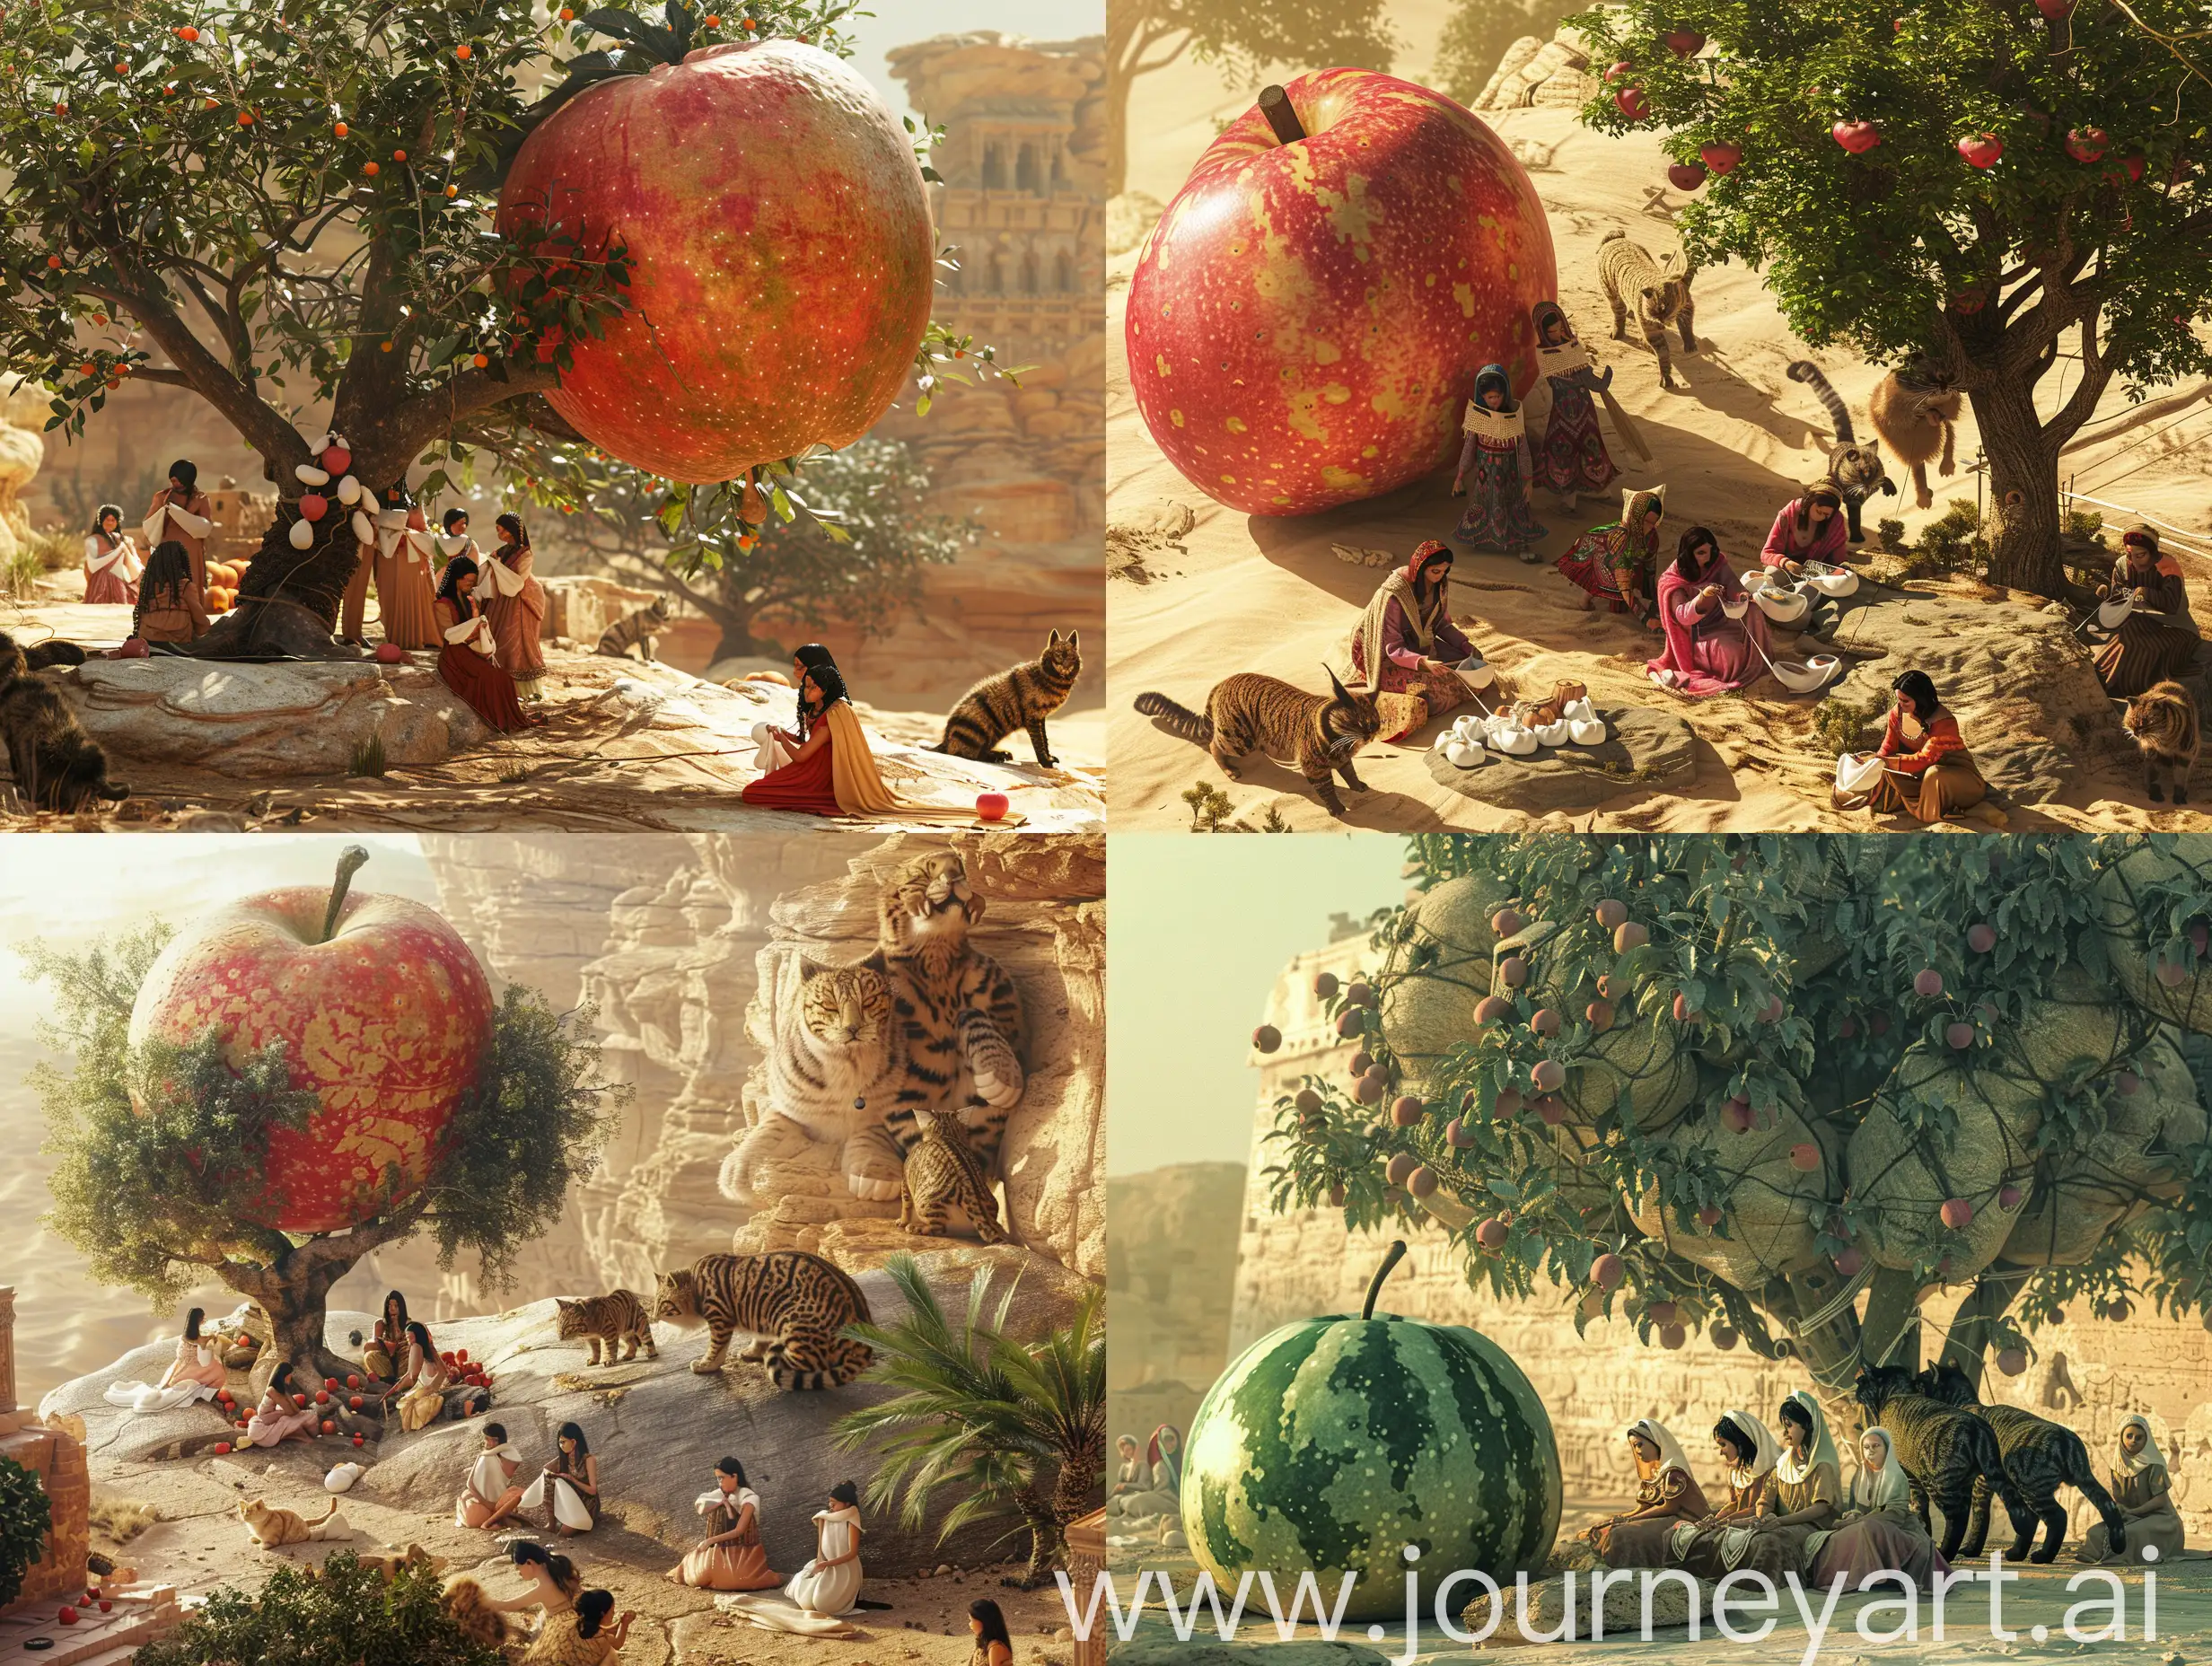 Persian-Women-Knitting-Cotton-Shawls-under-Giant-Apple-Tree-with-HorseSized-Cats-in-Ancient-Desert-Civilization